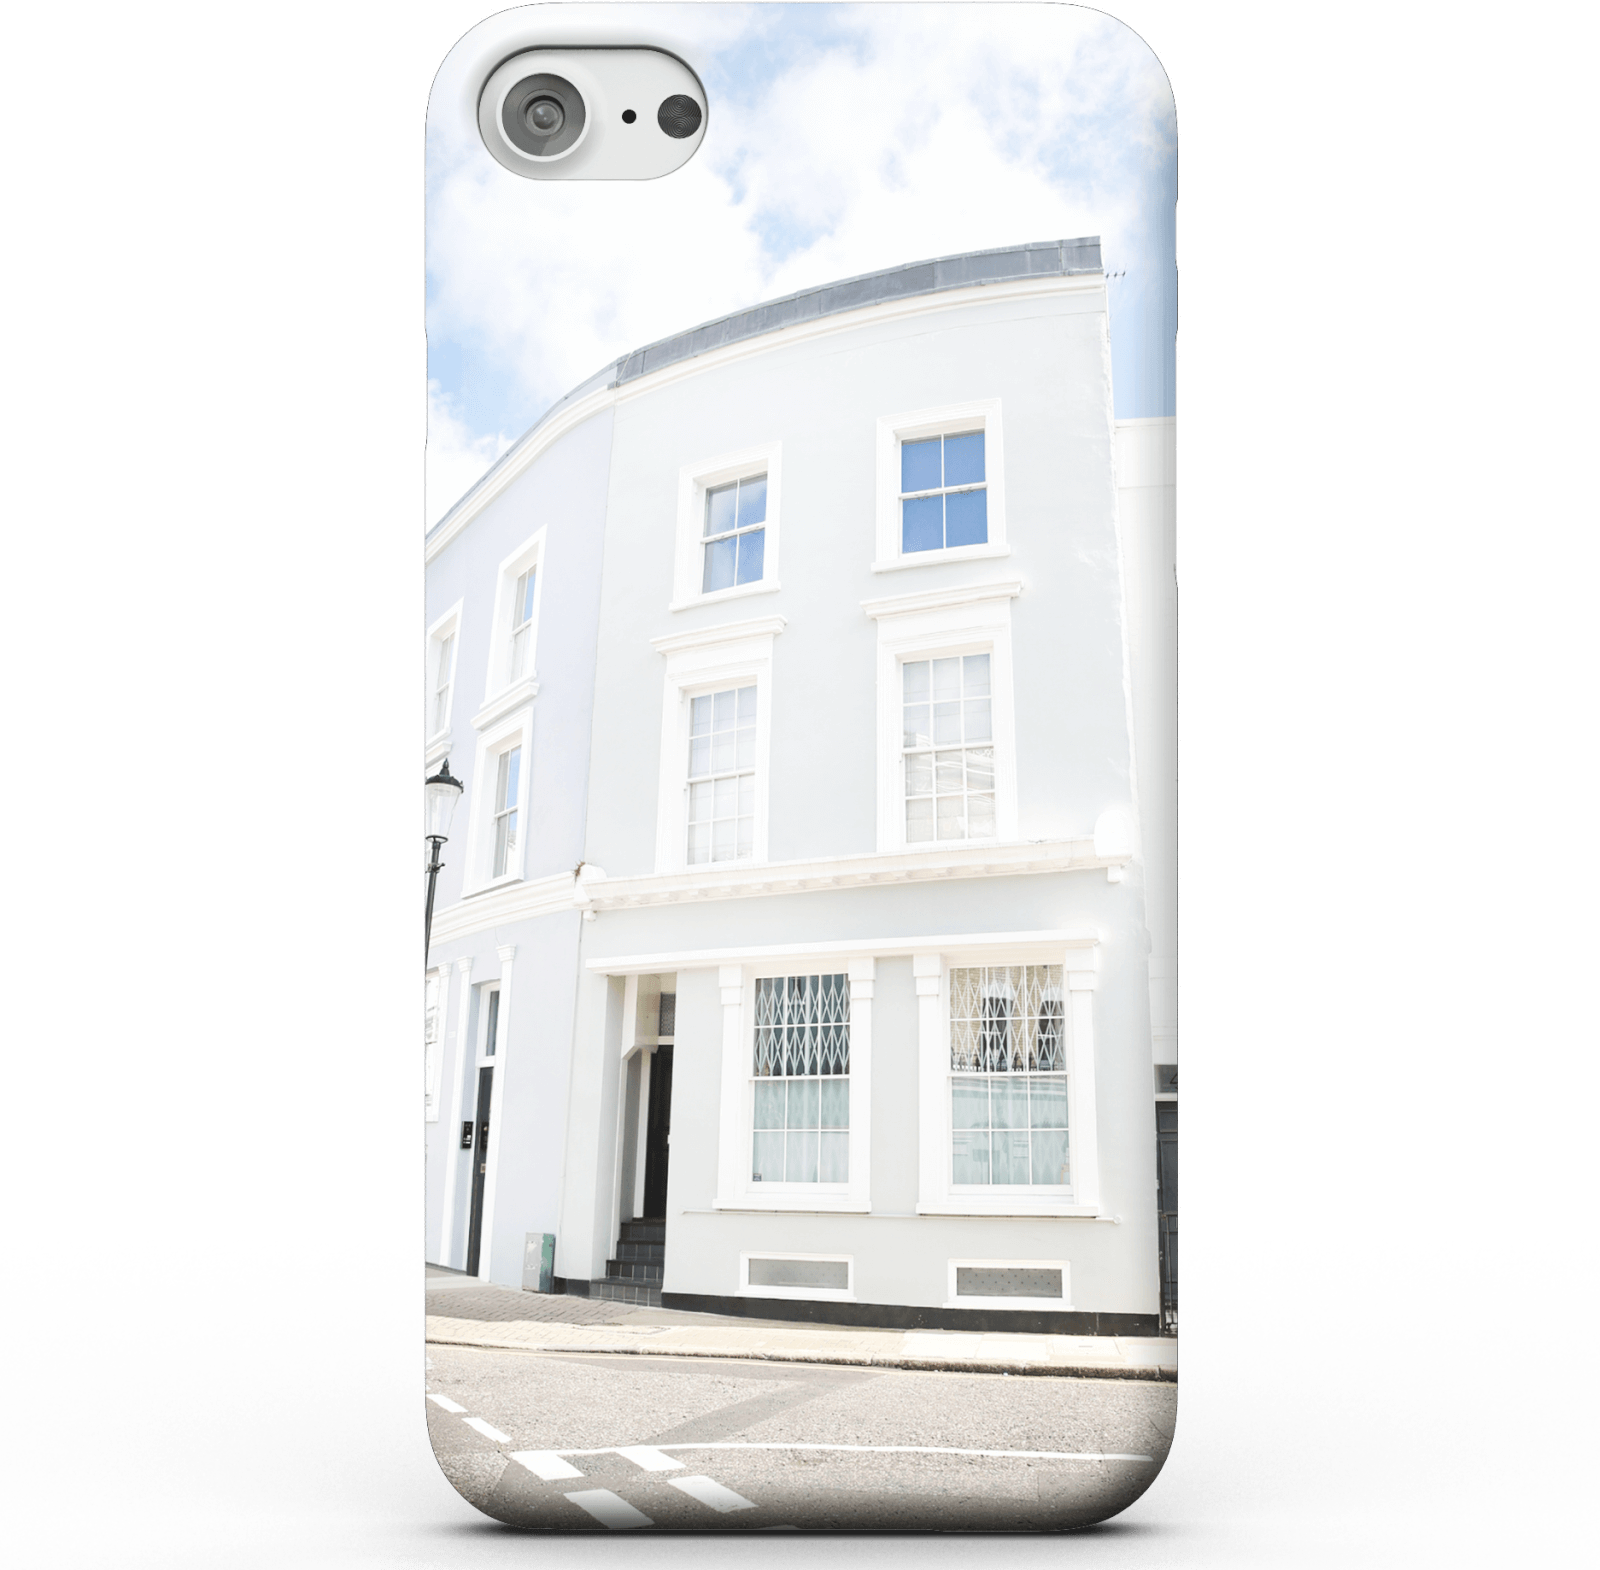 House On The Corner Phone Case for iPhone and Android - iPhone 5/5s - Snap Case - Matte